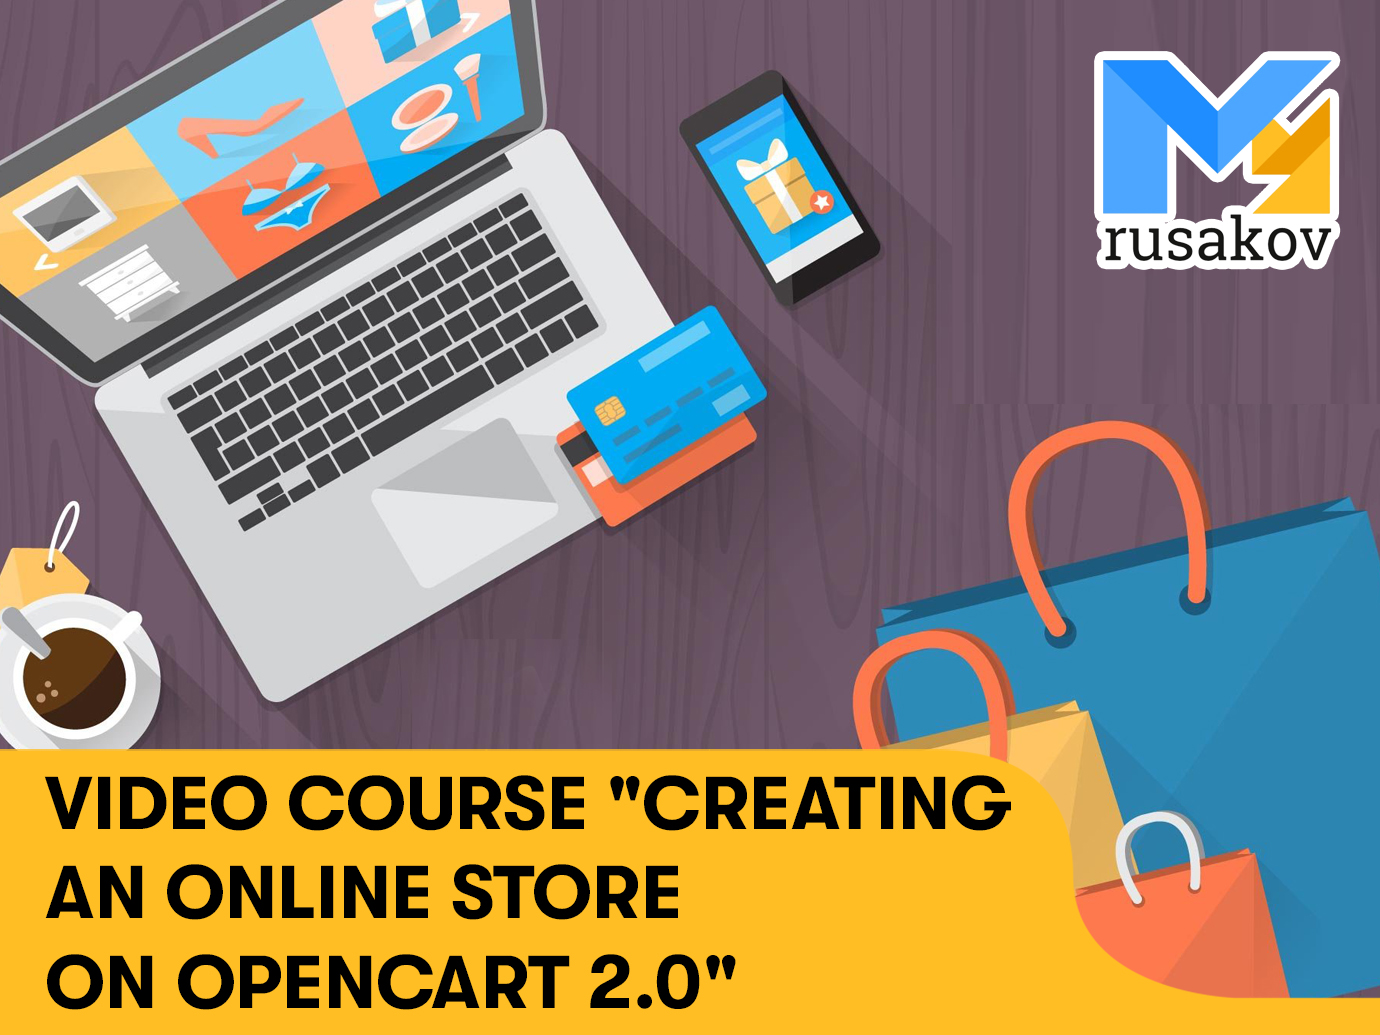 Video course “Creating an online store on OpenCart 2.0“